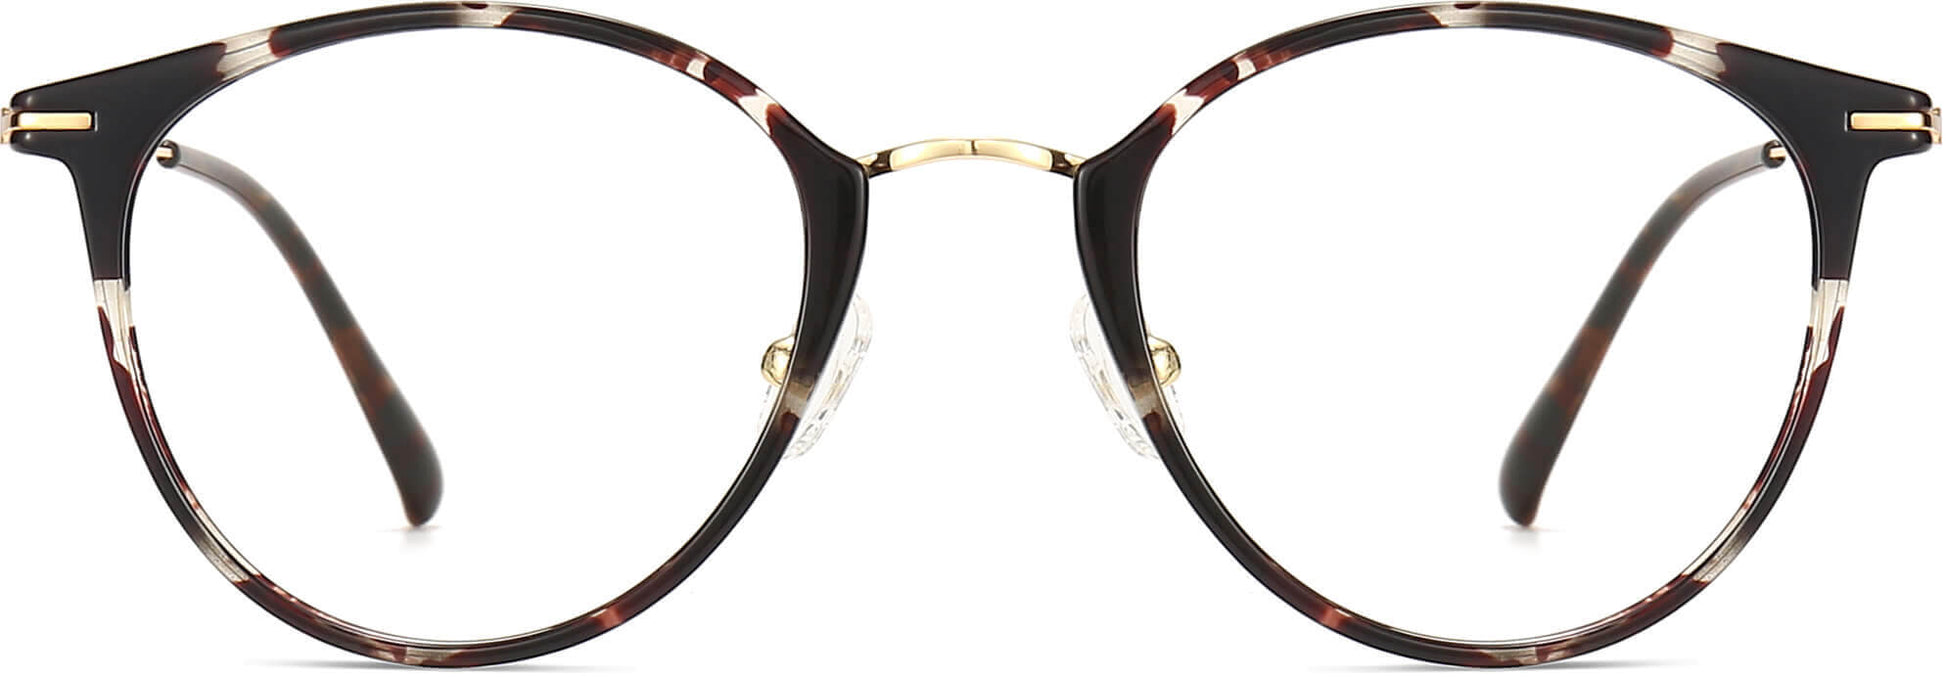 Noelle Round Tortoise Eyeglasses from ANRRI, front view